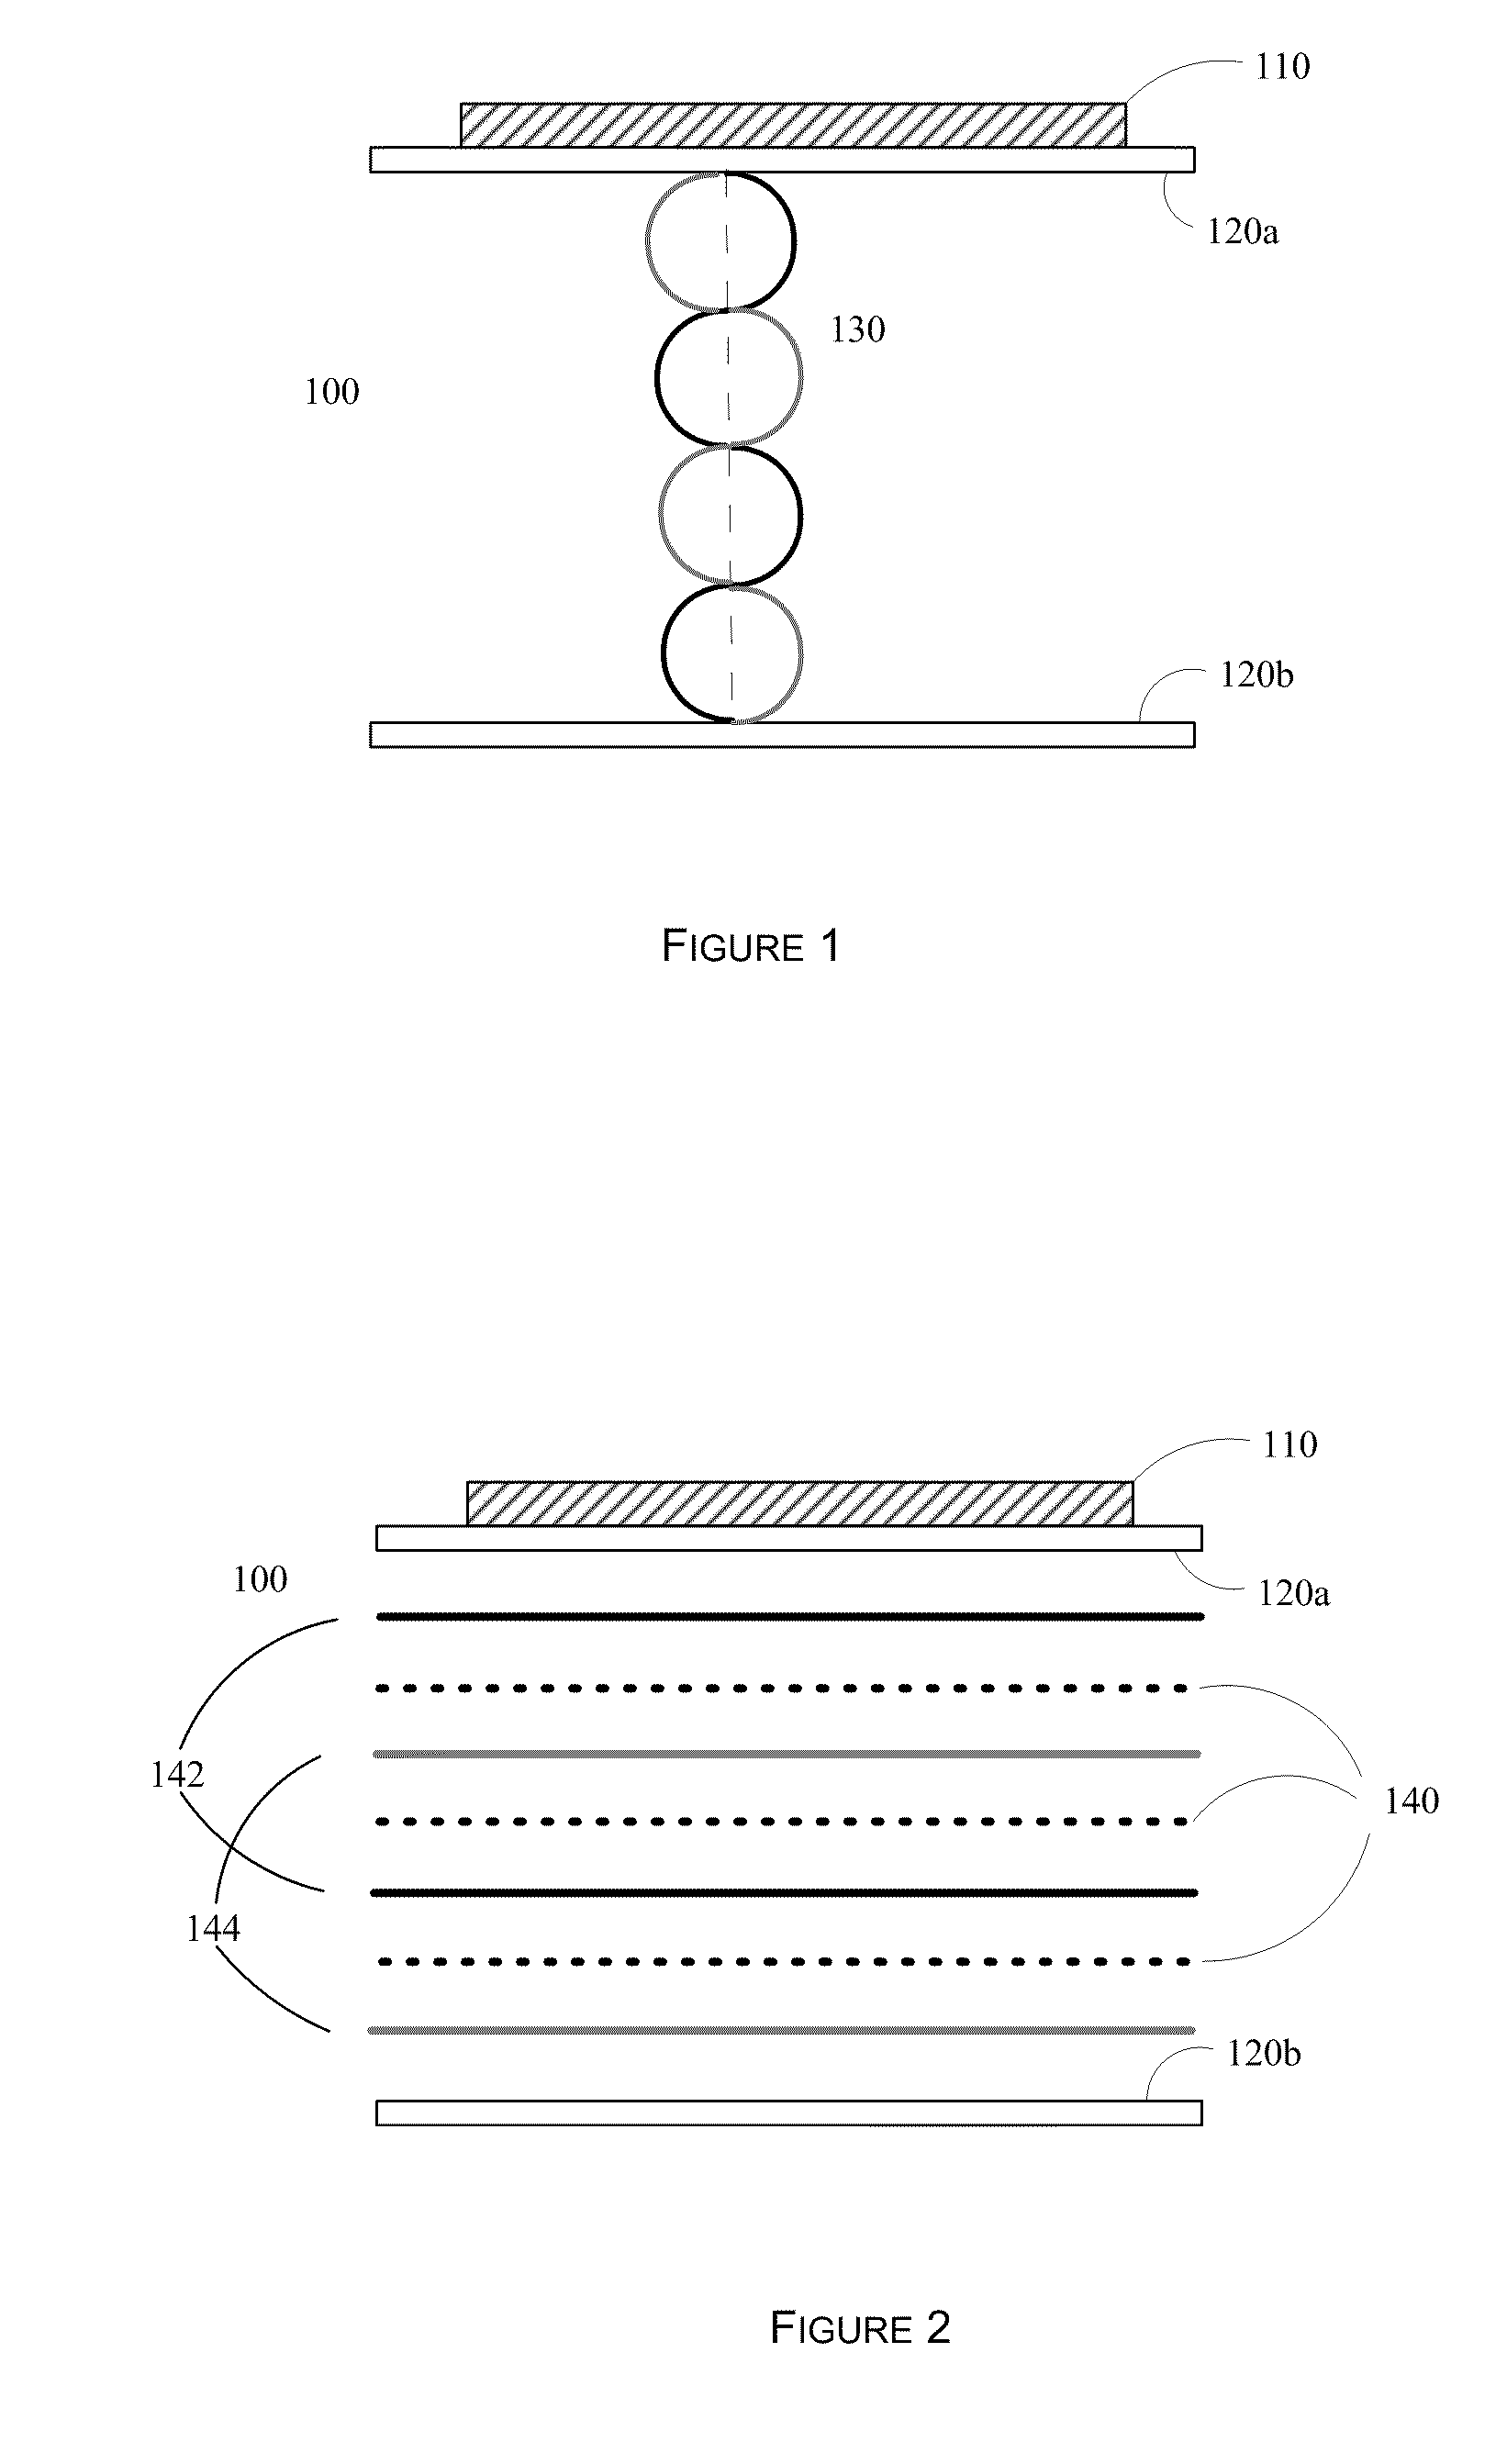 Selective lysing of cells using ultrasound